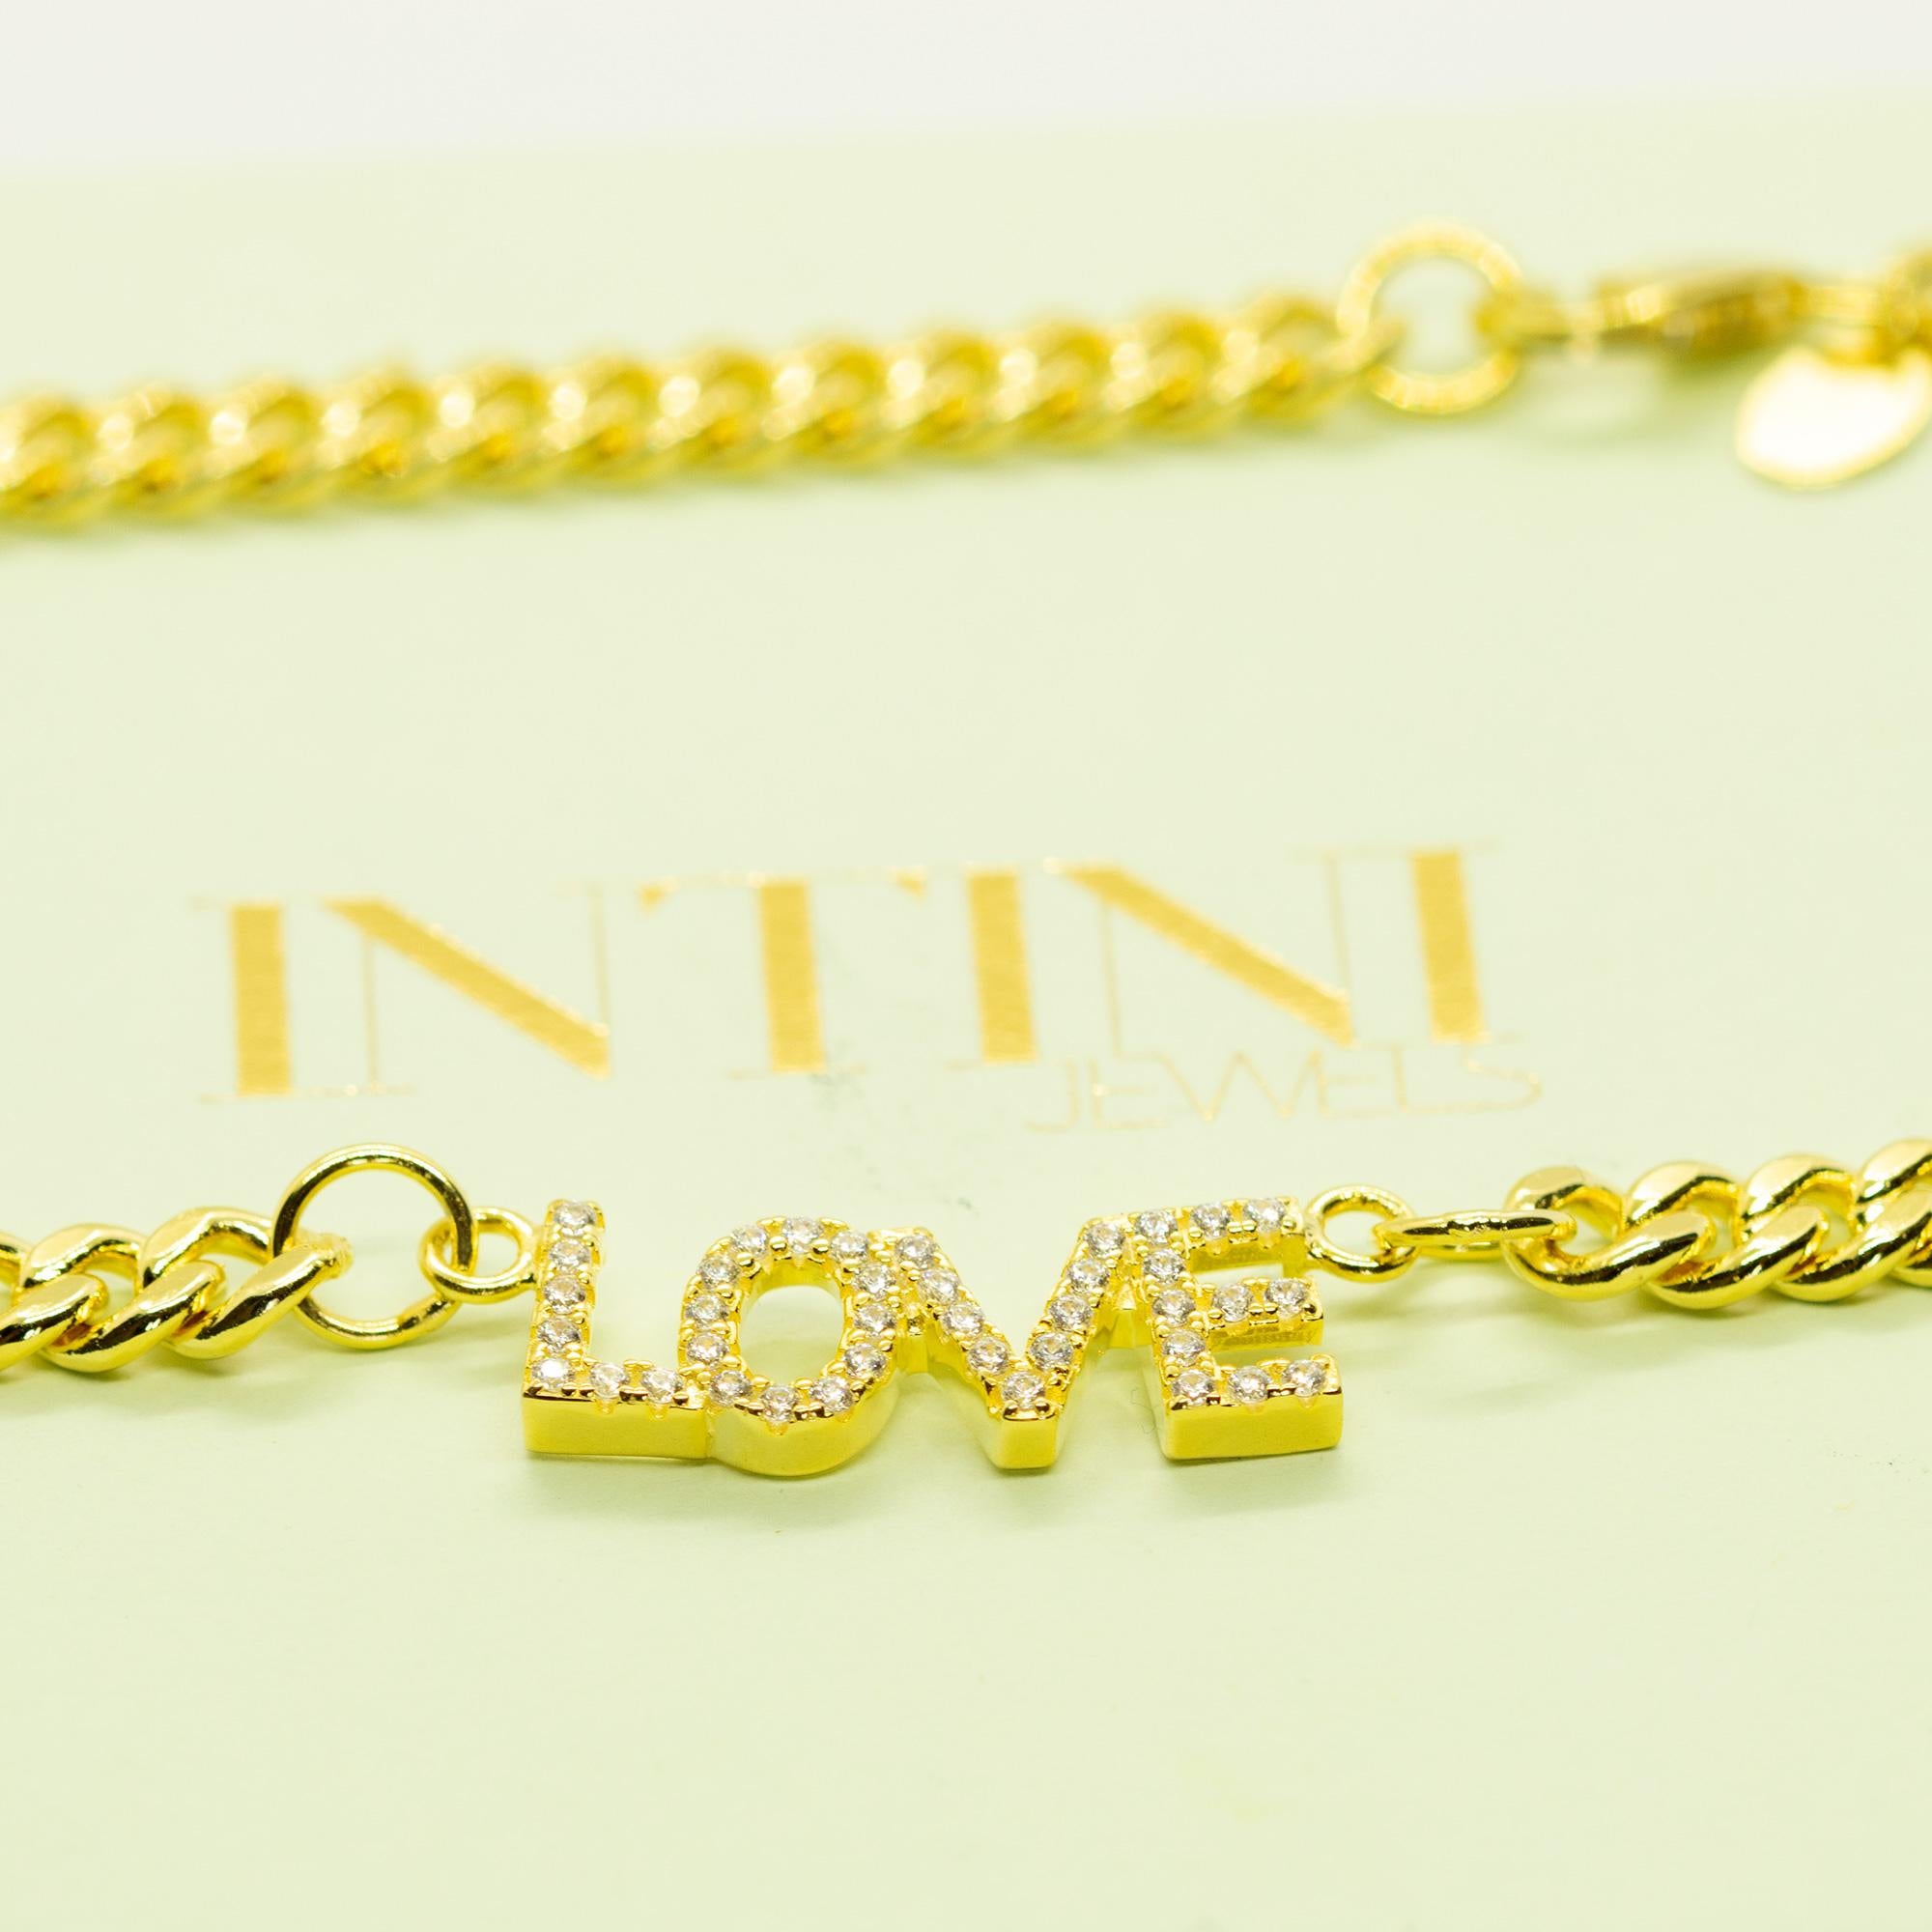 Unique romantic design for an outstanding personalised necklace, stating your true love.

Name can be personalised upon request.

• Gold Plate Silver
• Total length 40 cm
• Total Weight 25.5 g

The shape and color might vary according to the unique